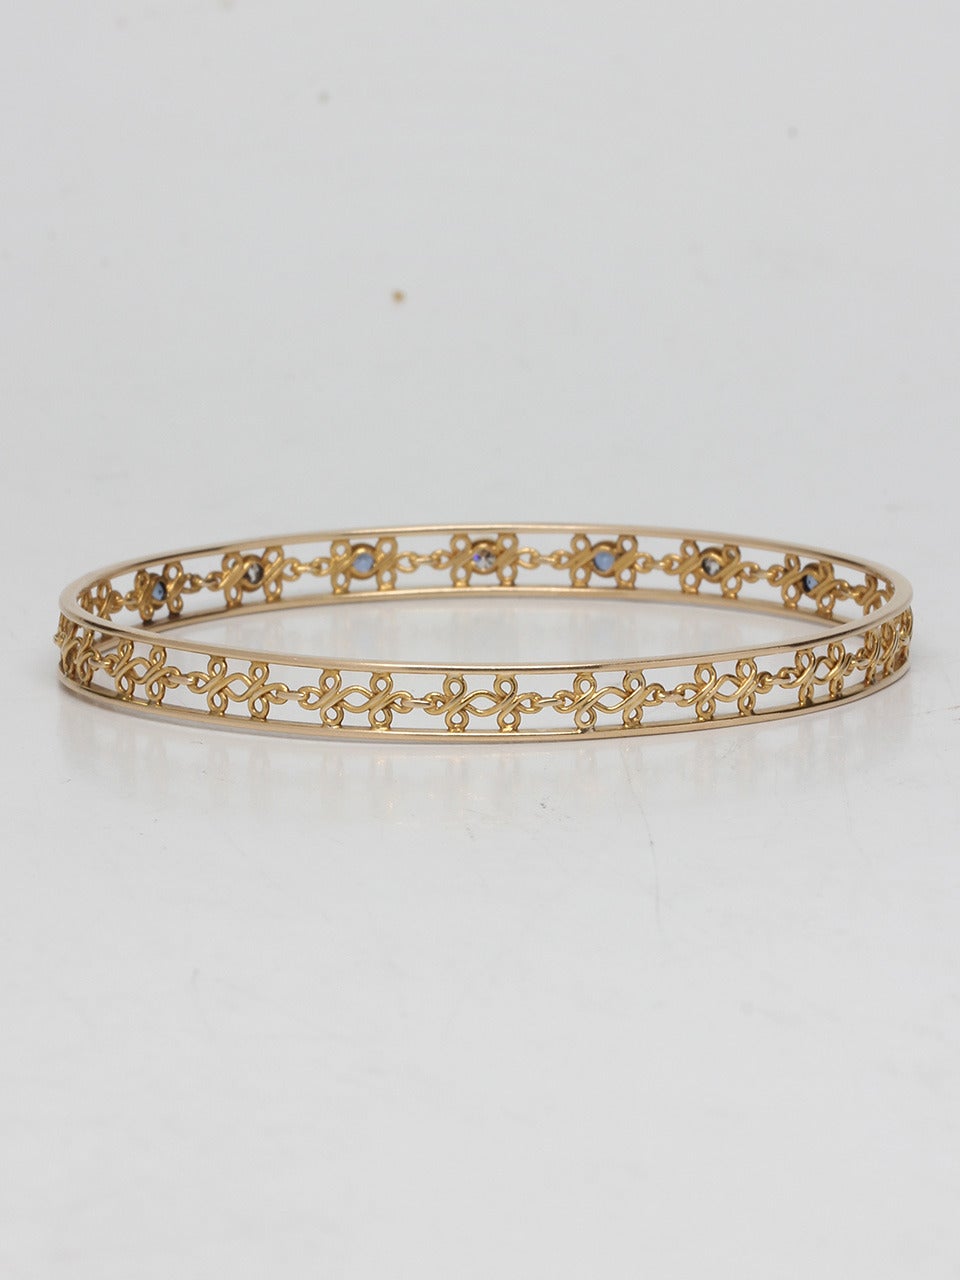 1930s 14K yellow gold diamond sapphire bangle bracelet with fine wire details. Alternating sapphires and Old European Cut diamonds. 6mm wide and Will fit over 10" hand. Point your fingers and measure your hand at knuckles. Very beautiful airy